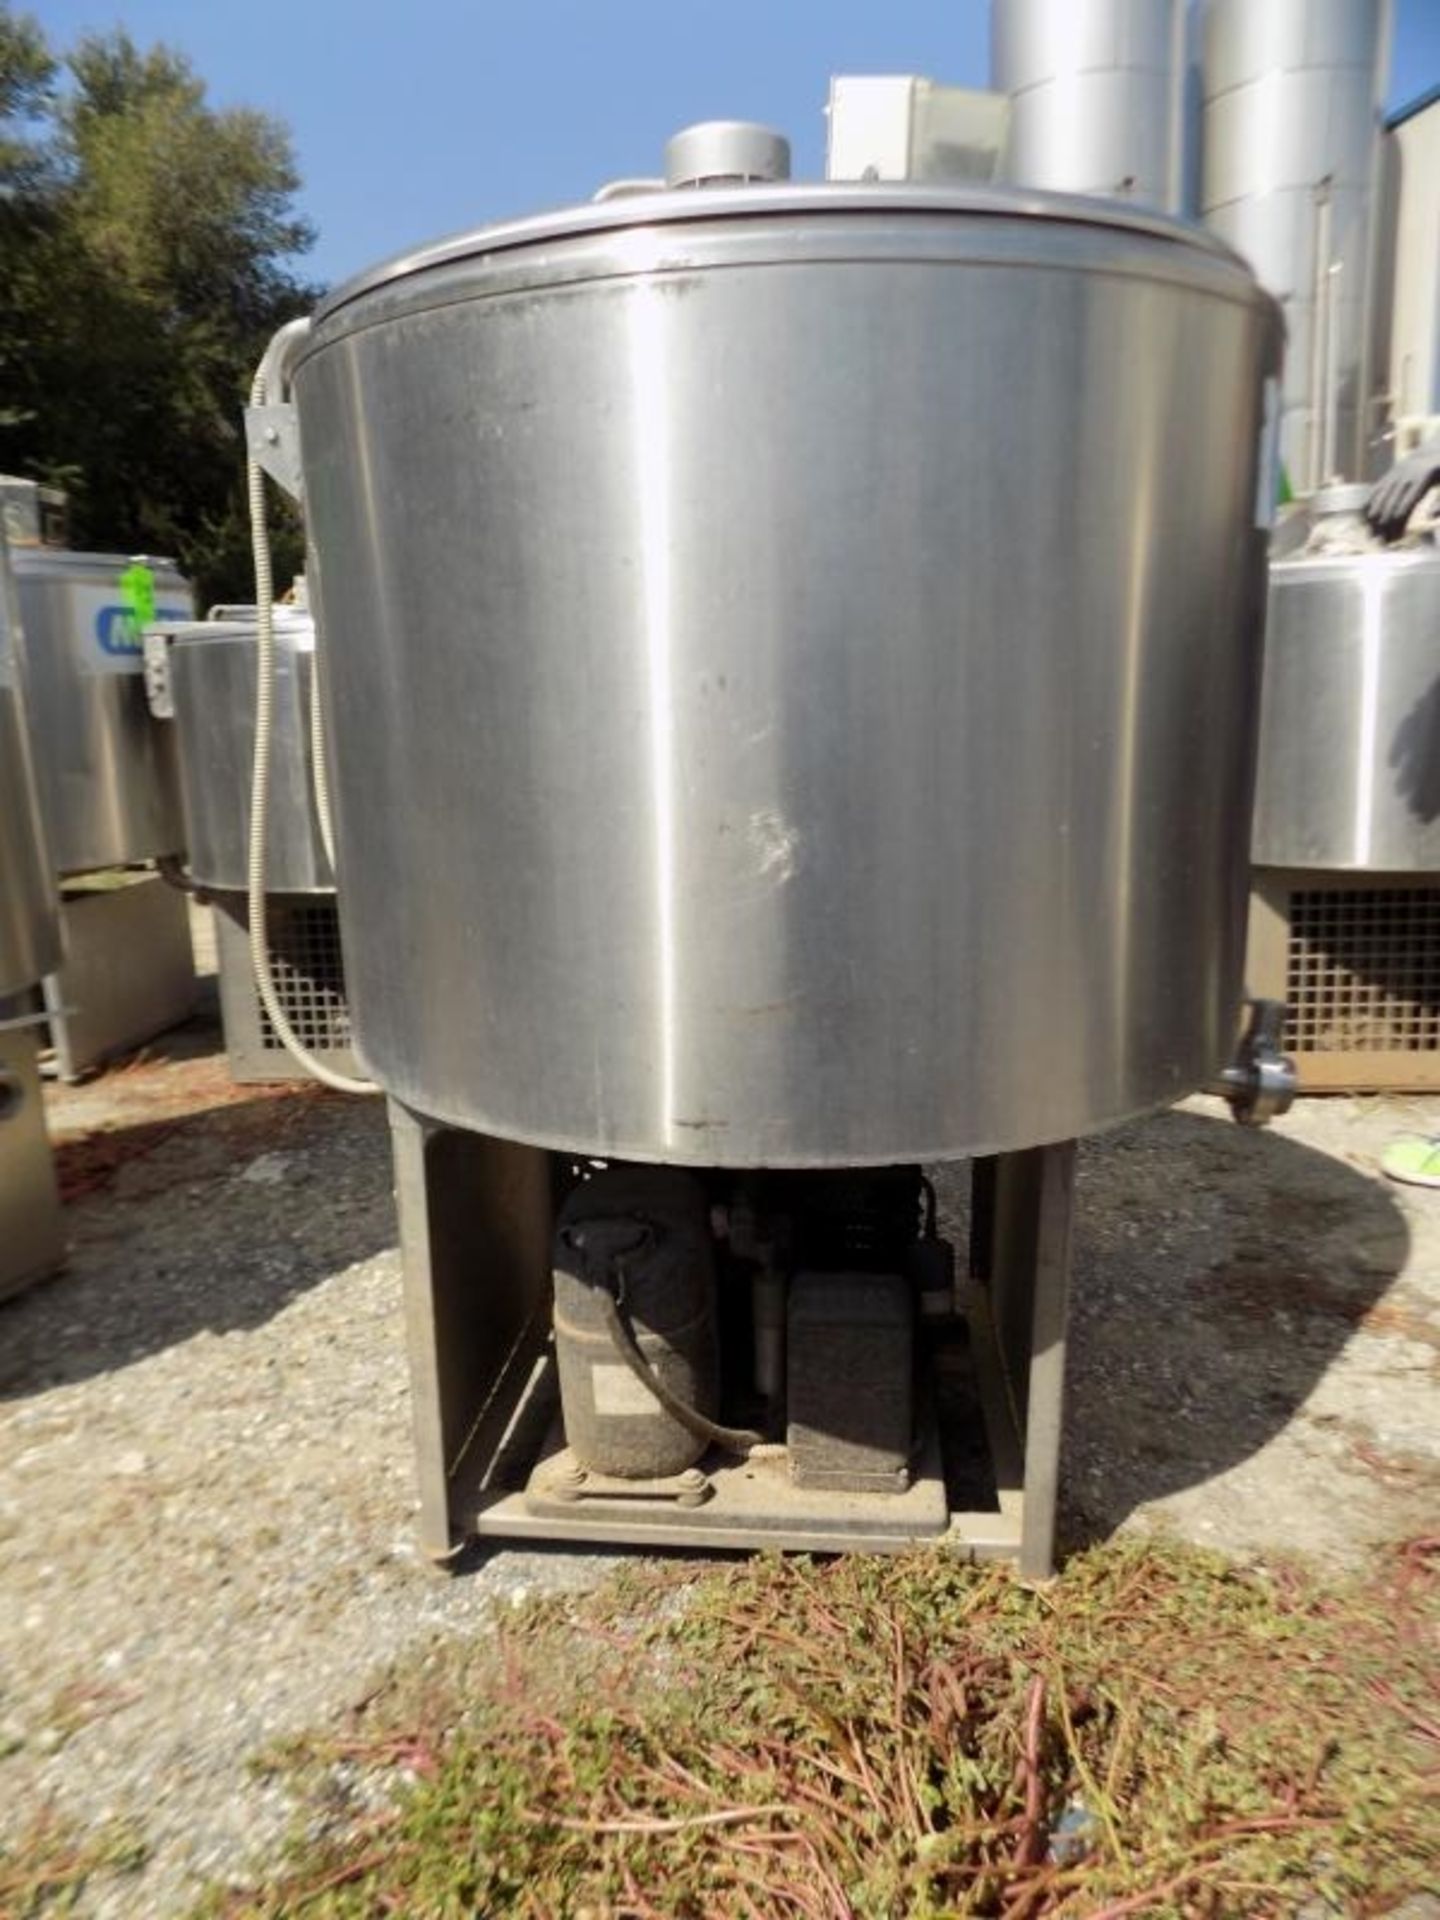 Ermicon (Packo) Aprox. 300 L/79 Gal. S/S Jacketed Farm Tank with Hinged Lid, Twin Blade Prop, - Image 4 of 4